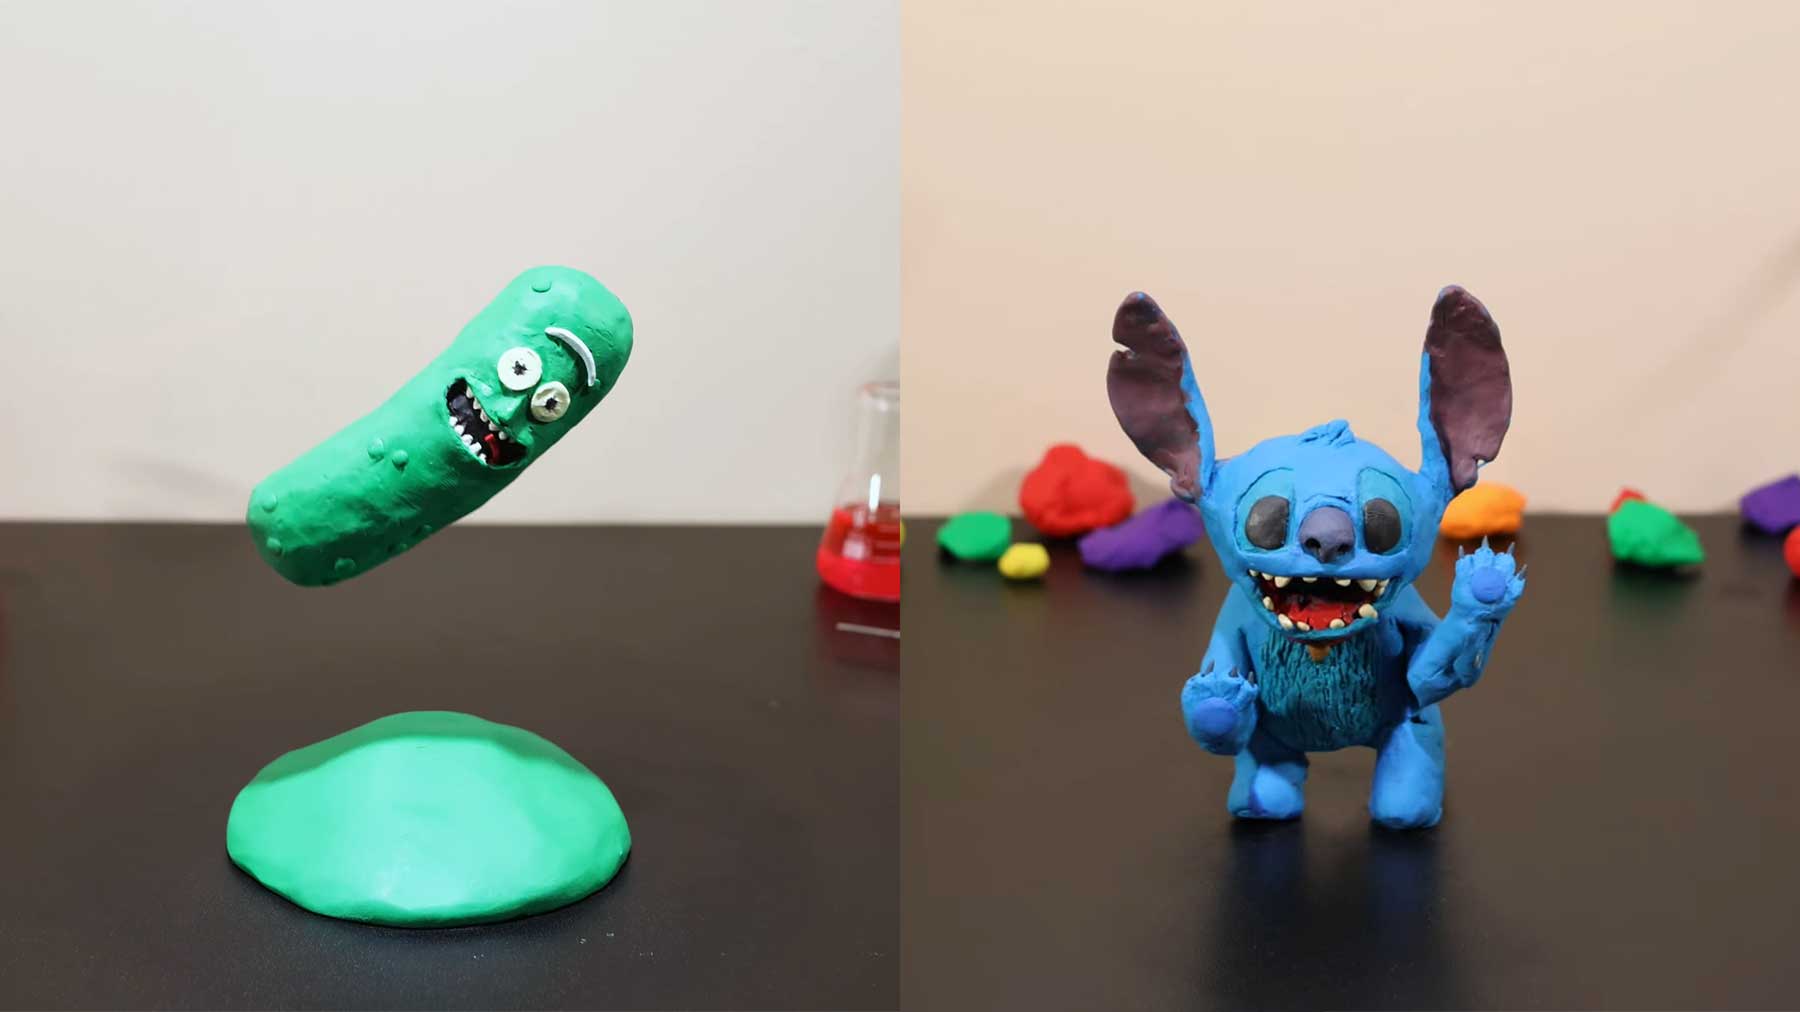 Knet-Stopmotion: The Green & Blue Claymation